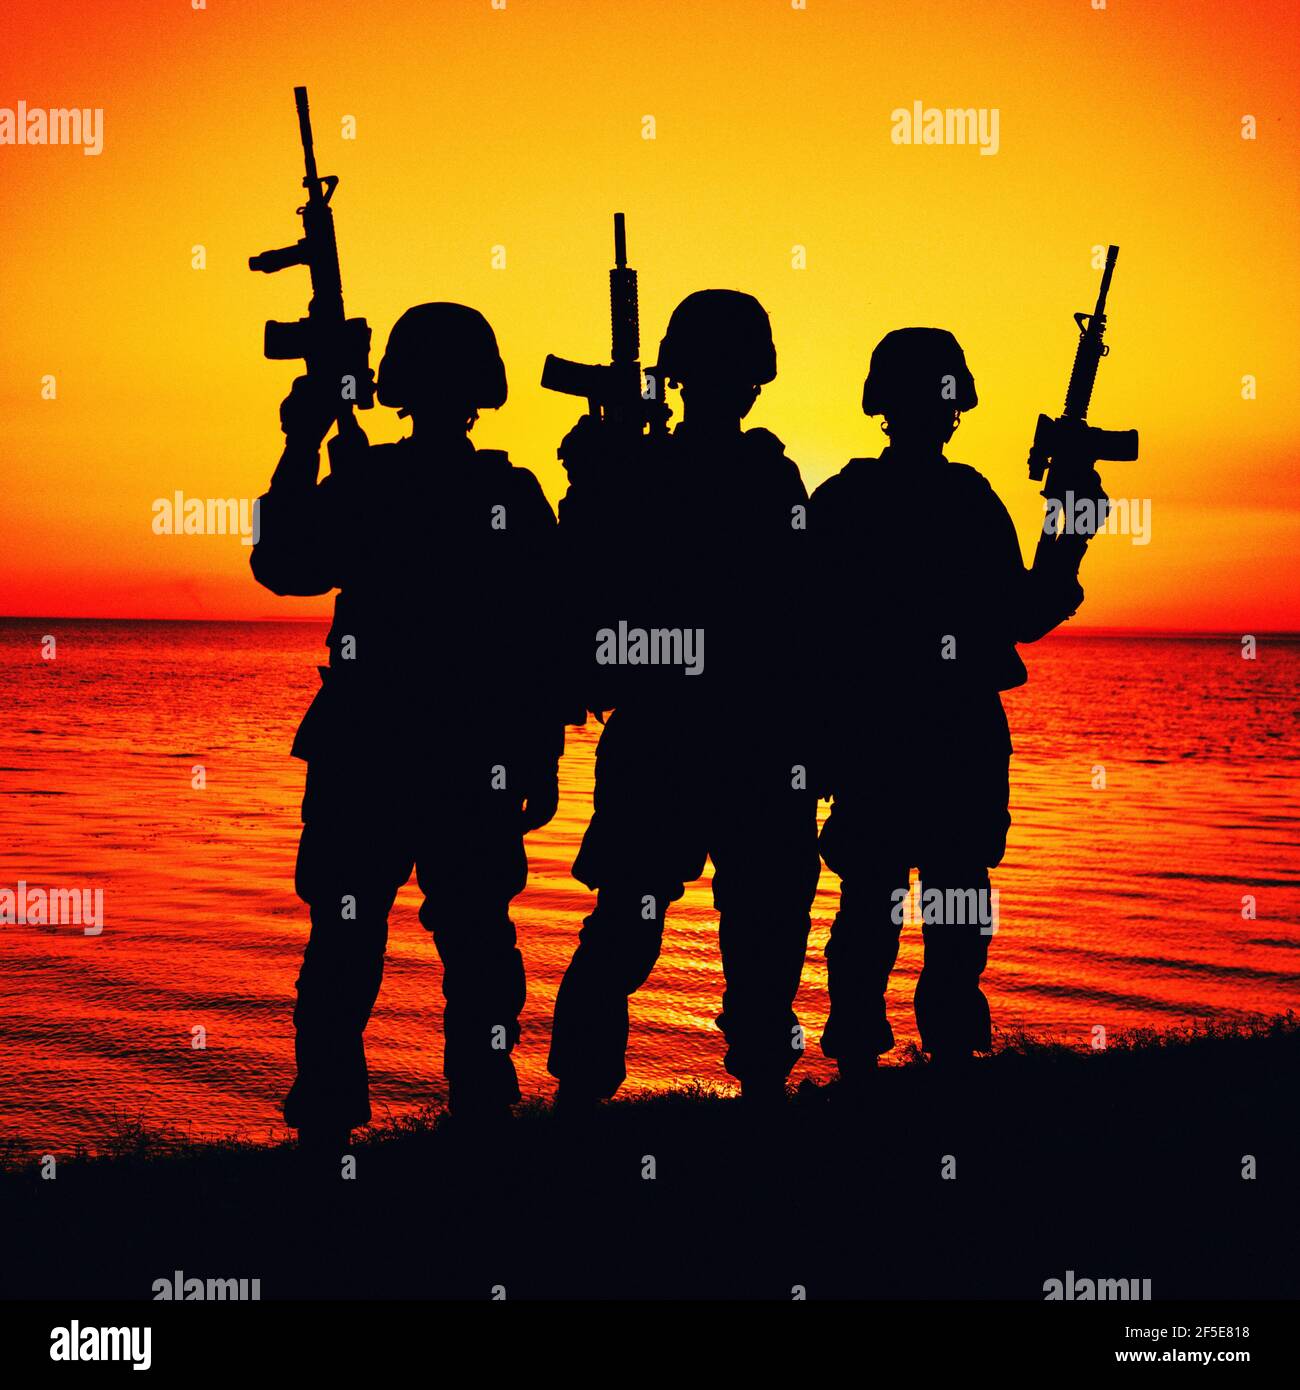 Silhouette of army special operations forces soldiers team, group of Marines or coast guard fighters crew in ammunition and combat helmets standing on seashore at sunset with raised assault rifles Stock Photo